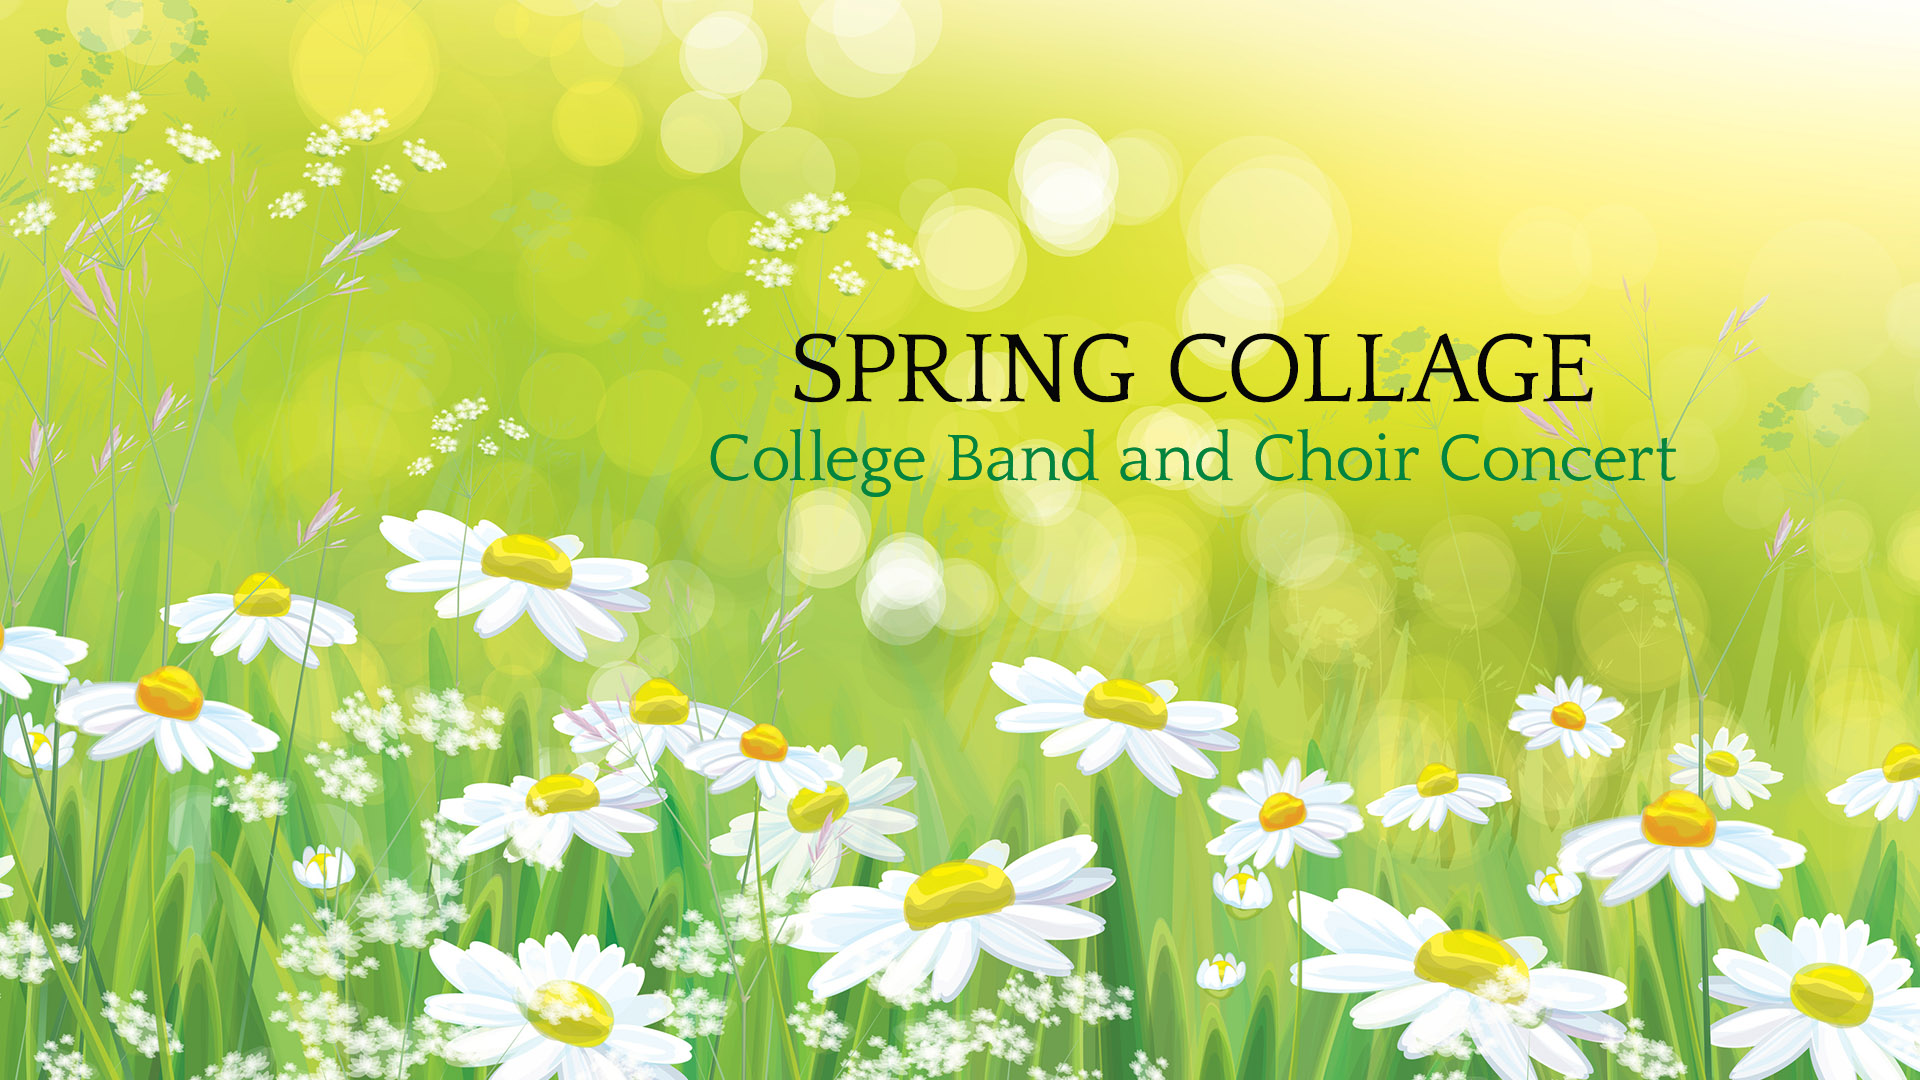 Spring Collage concert graphic